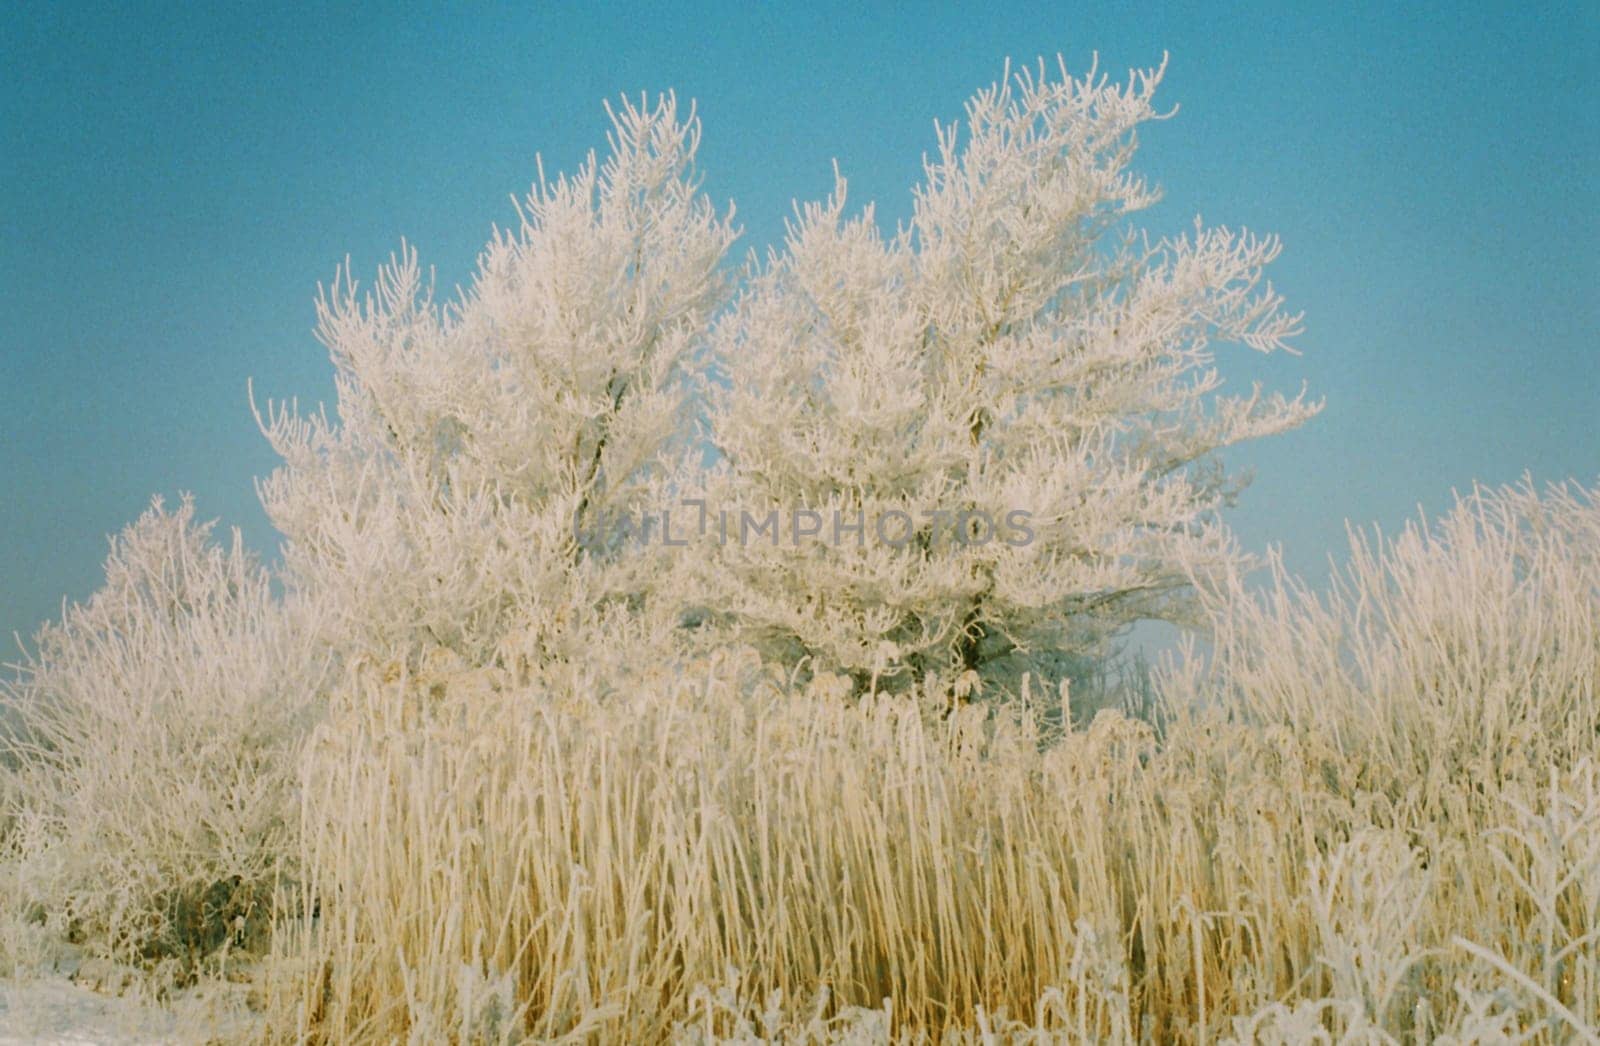 Trees and grass covered with frost and snow against a blue sky.